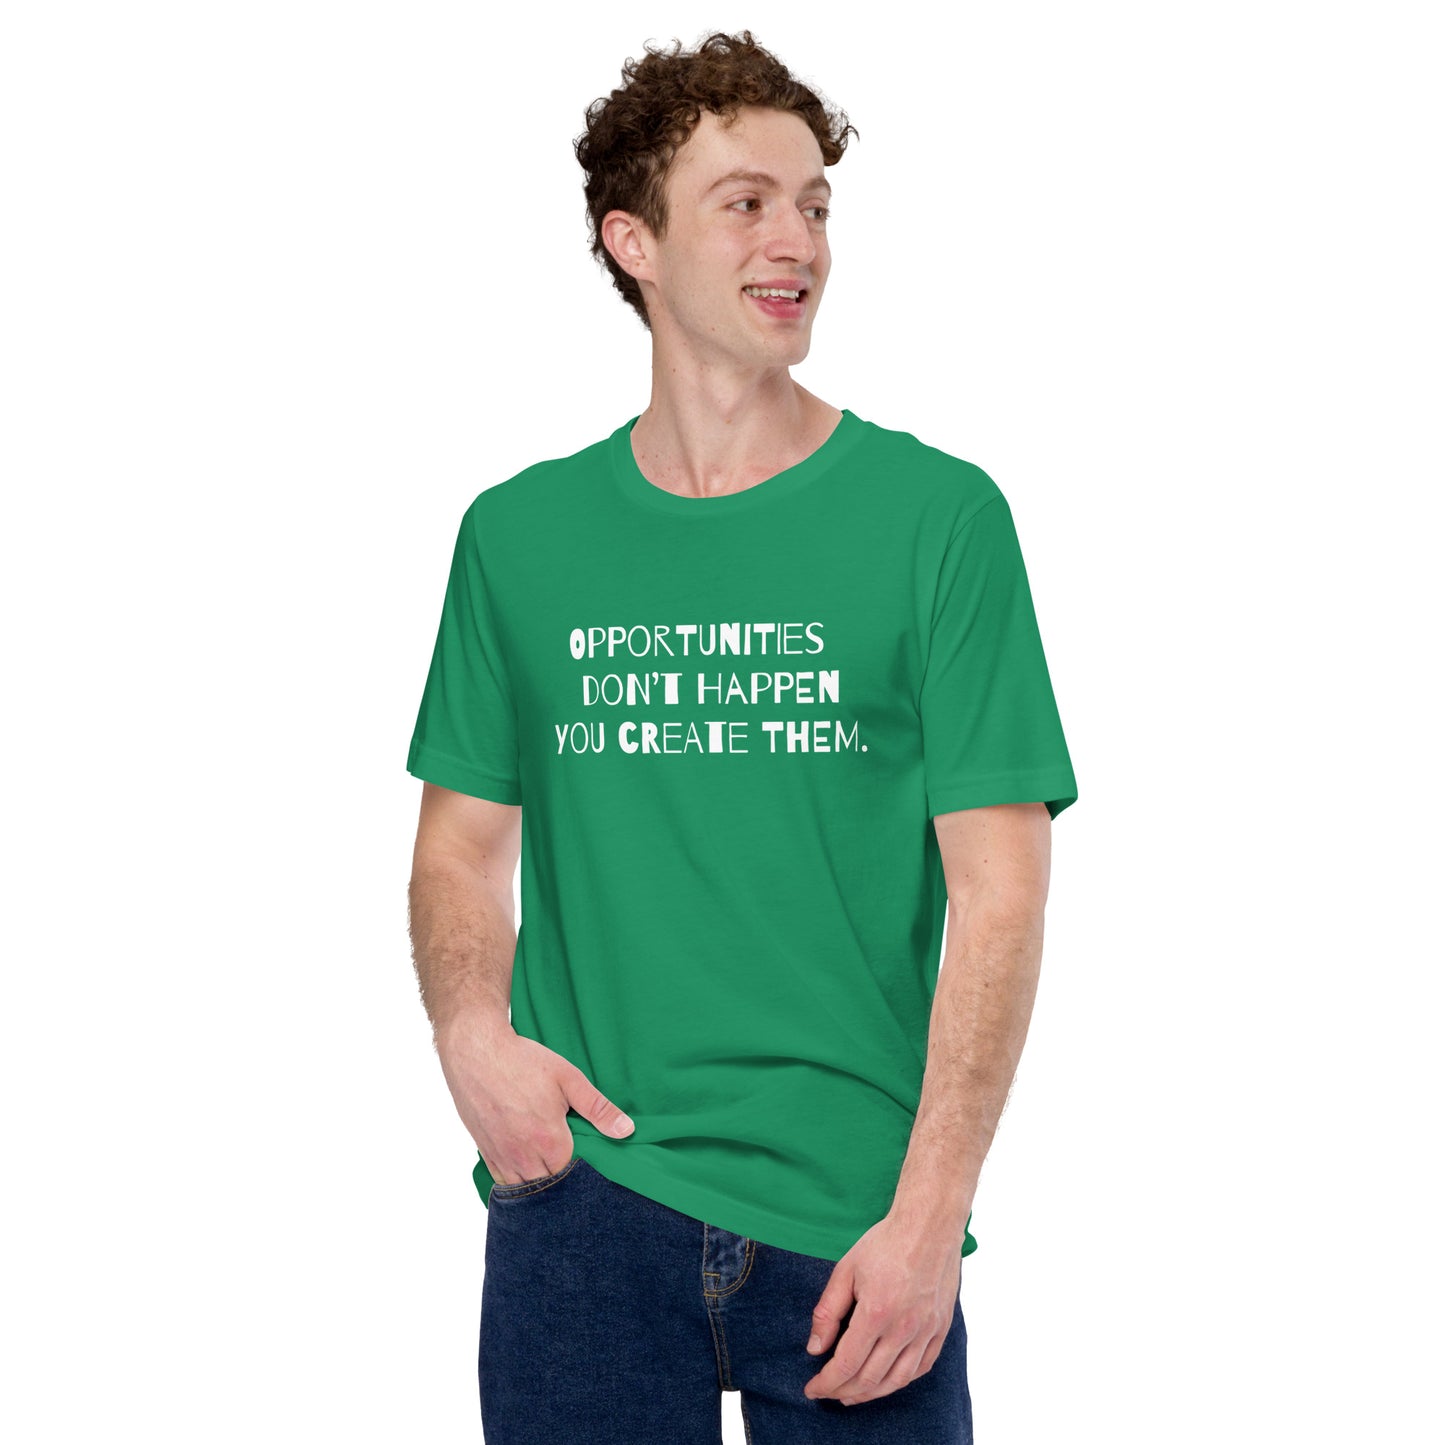 Opportunities don’t happen. You create them. T-shirt